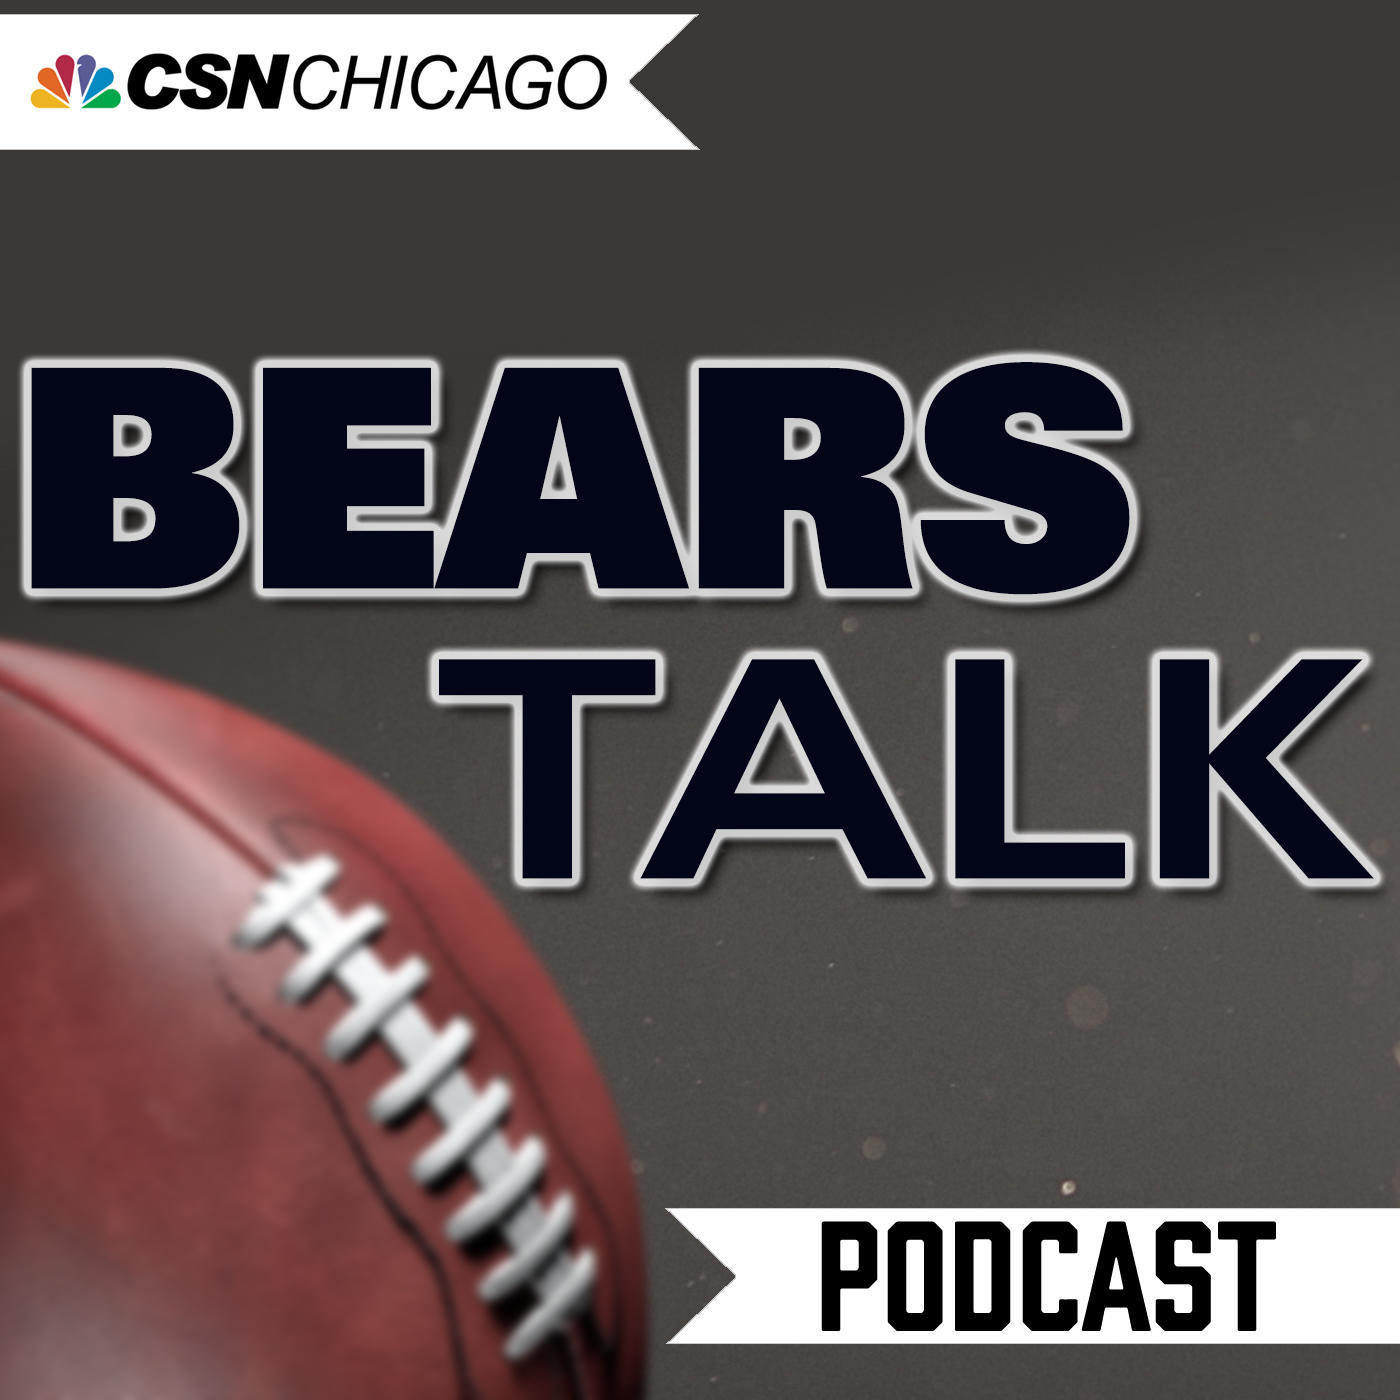 Ep. 60: Mike Glennon, Mitch Trubisky move in opposite directions in Bears’ first preseason game